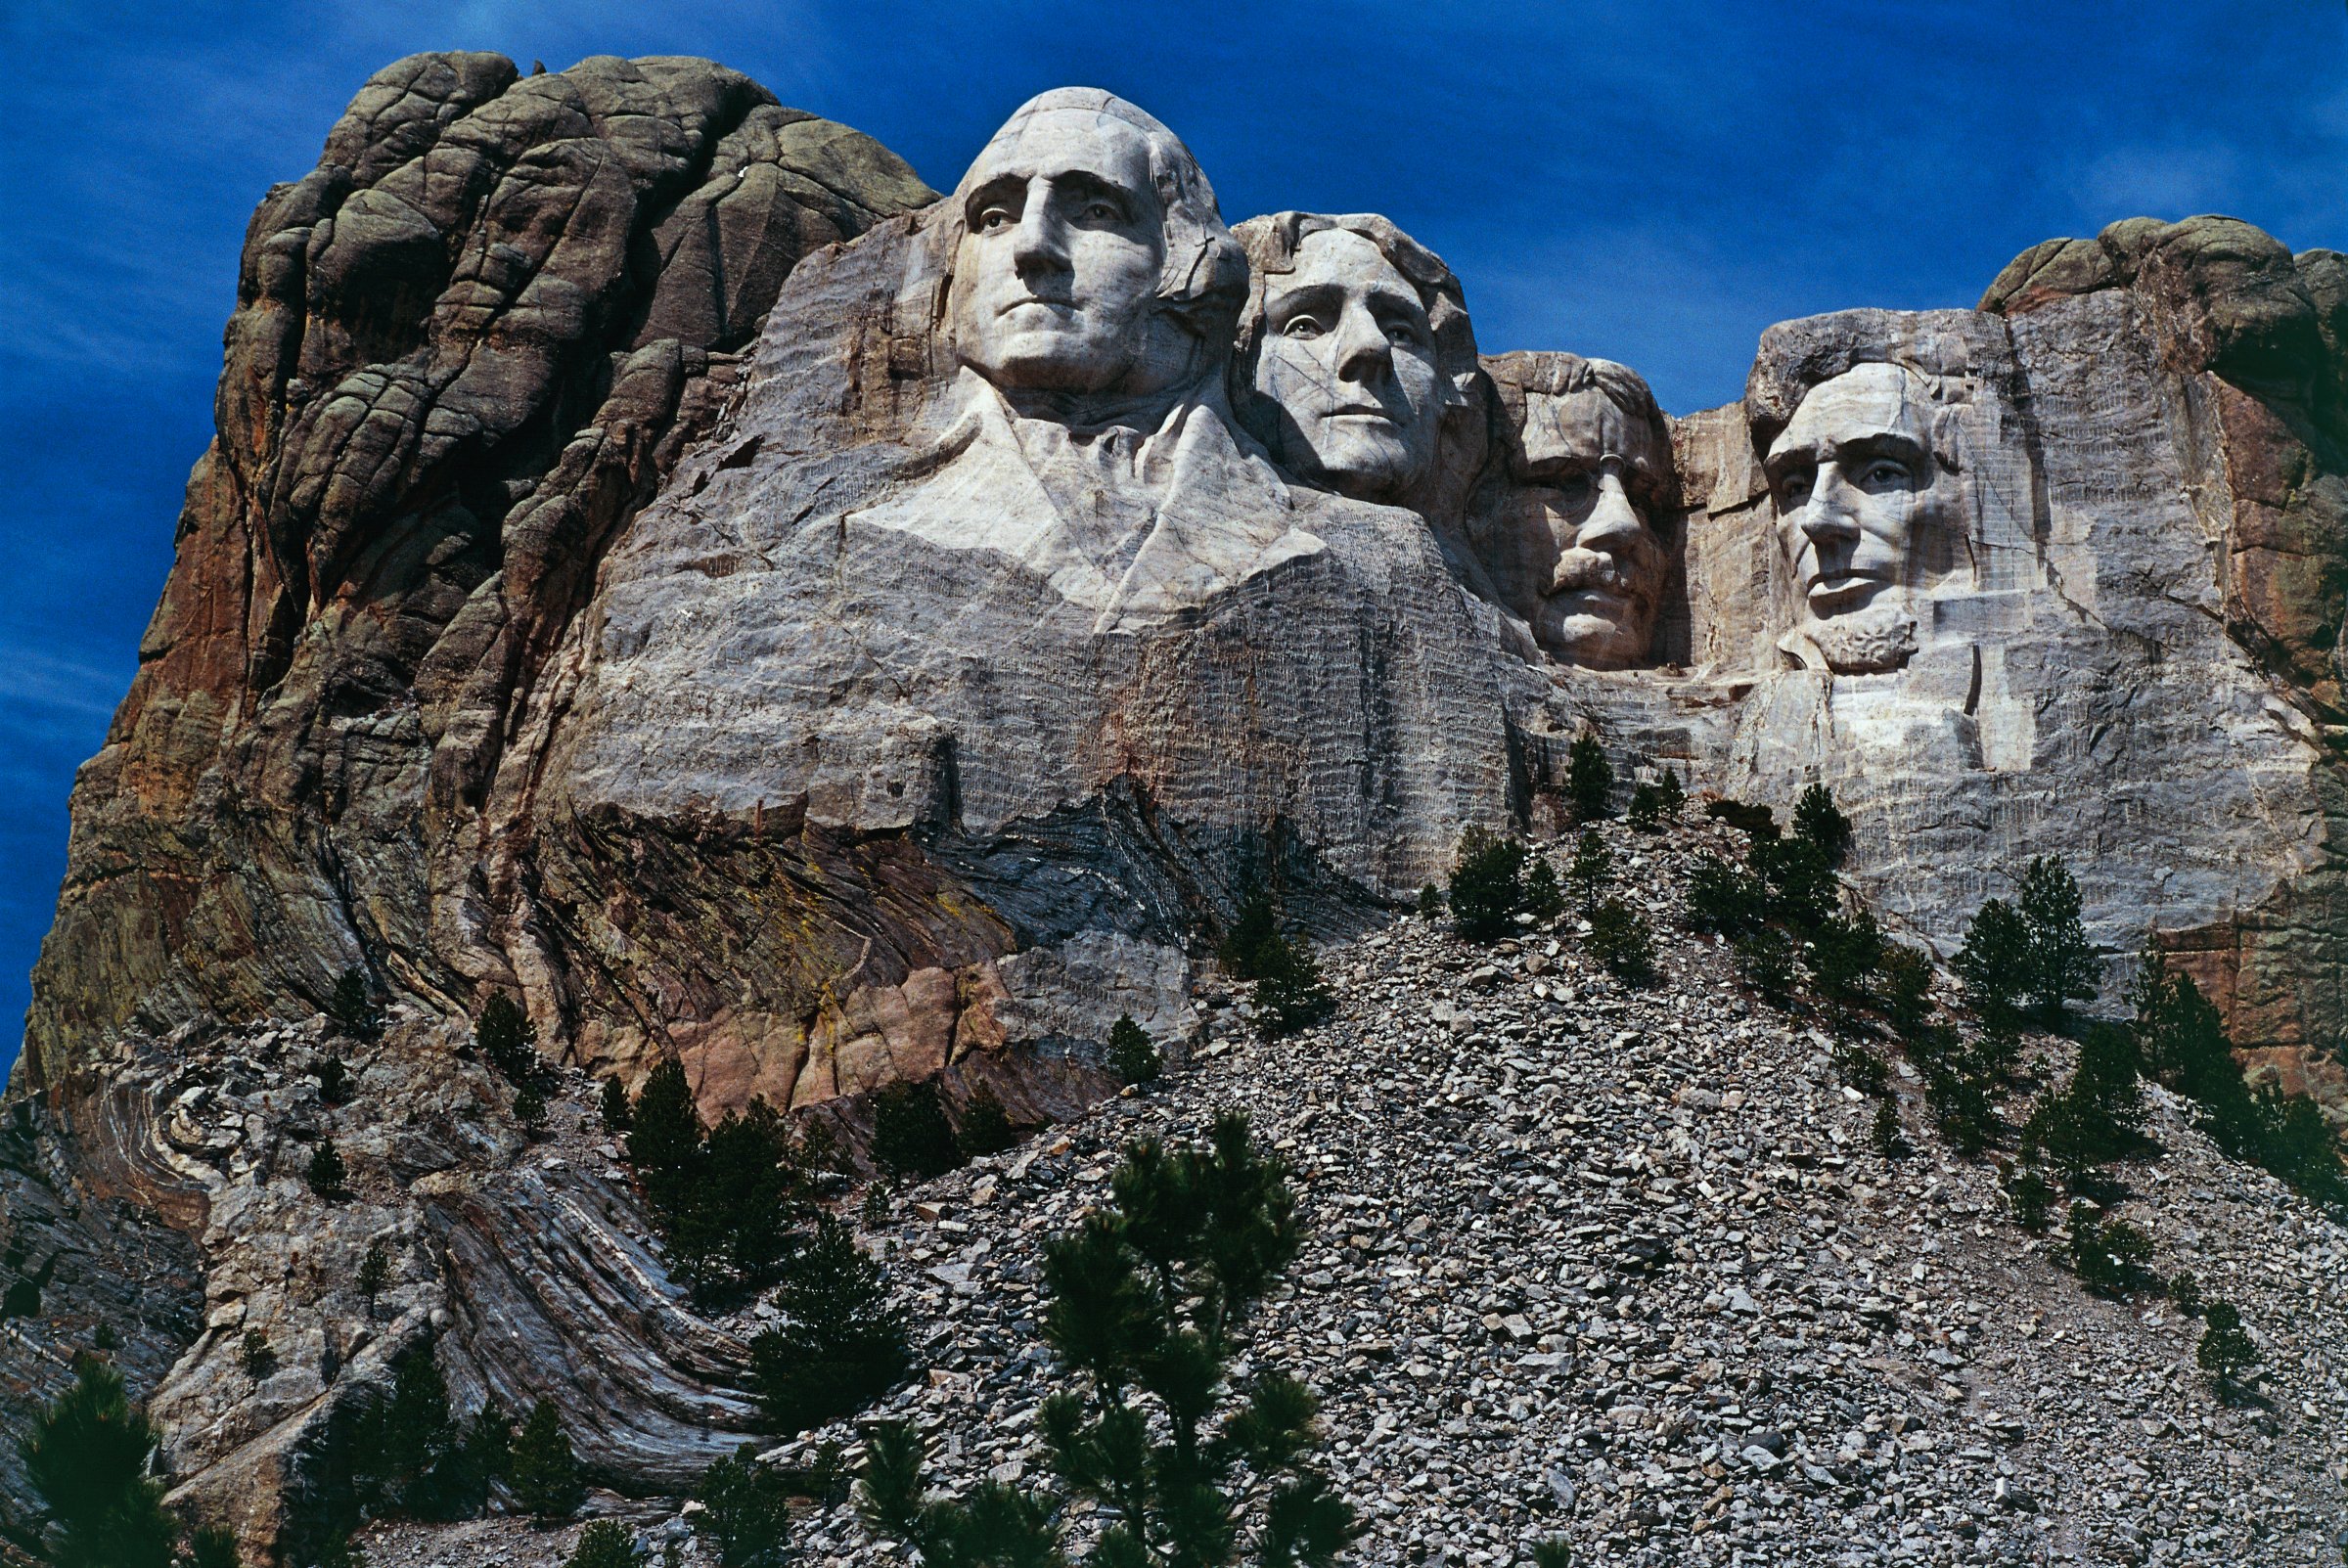 The carved sculptures depicting the faces of US Presidents George Washington (1732-1799) and Thomas Jefferson (1743-1826), National monument, Mount Rushmore, South Dakota, United States of America.